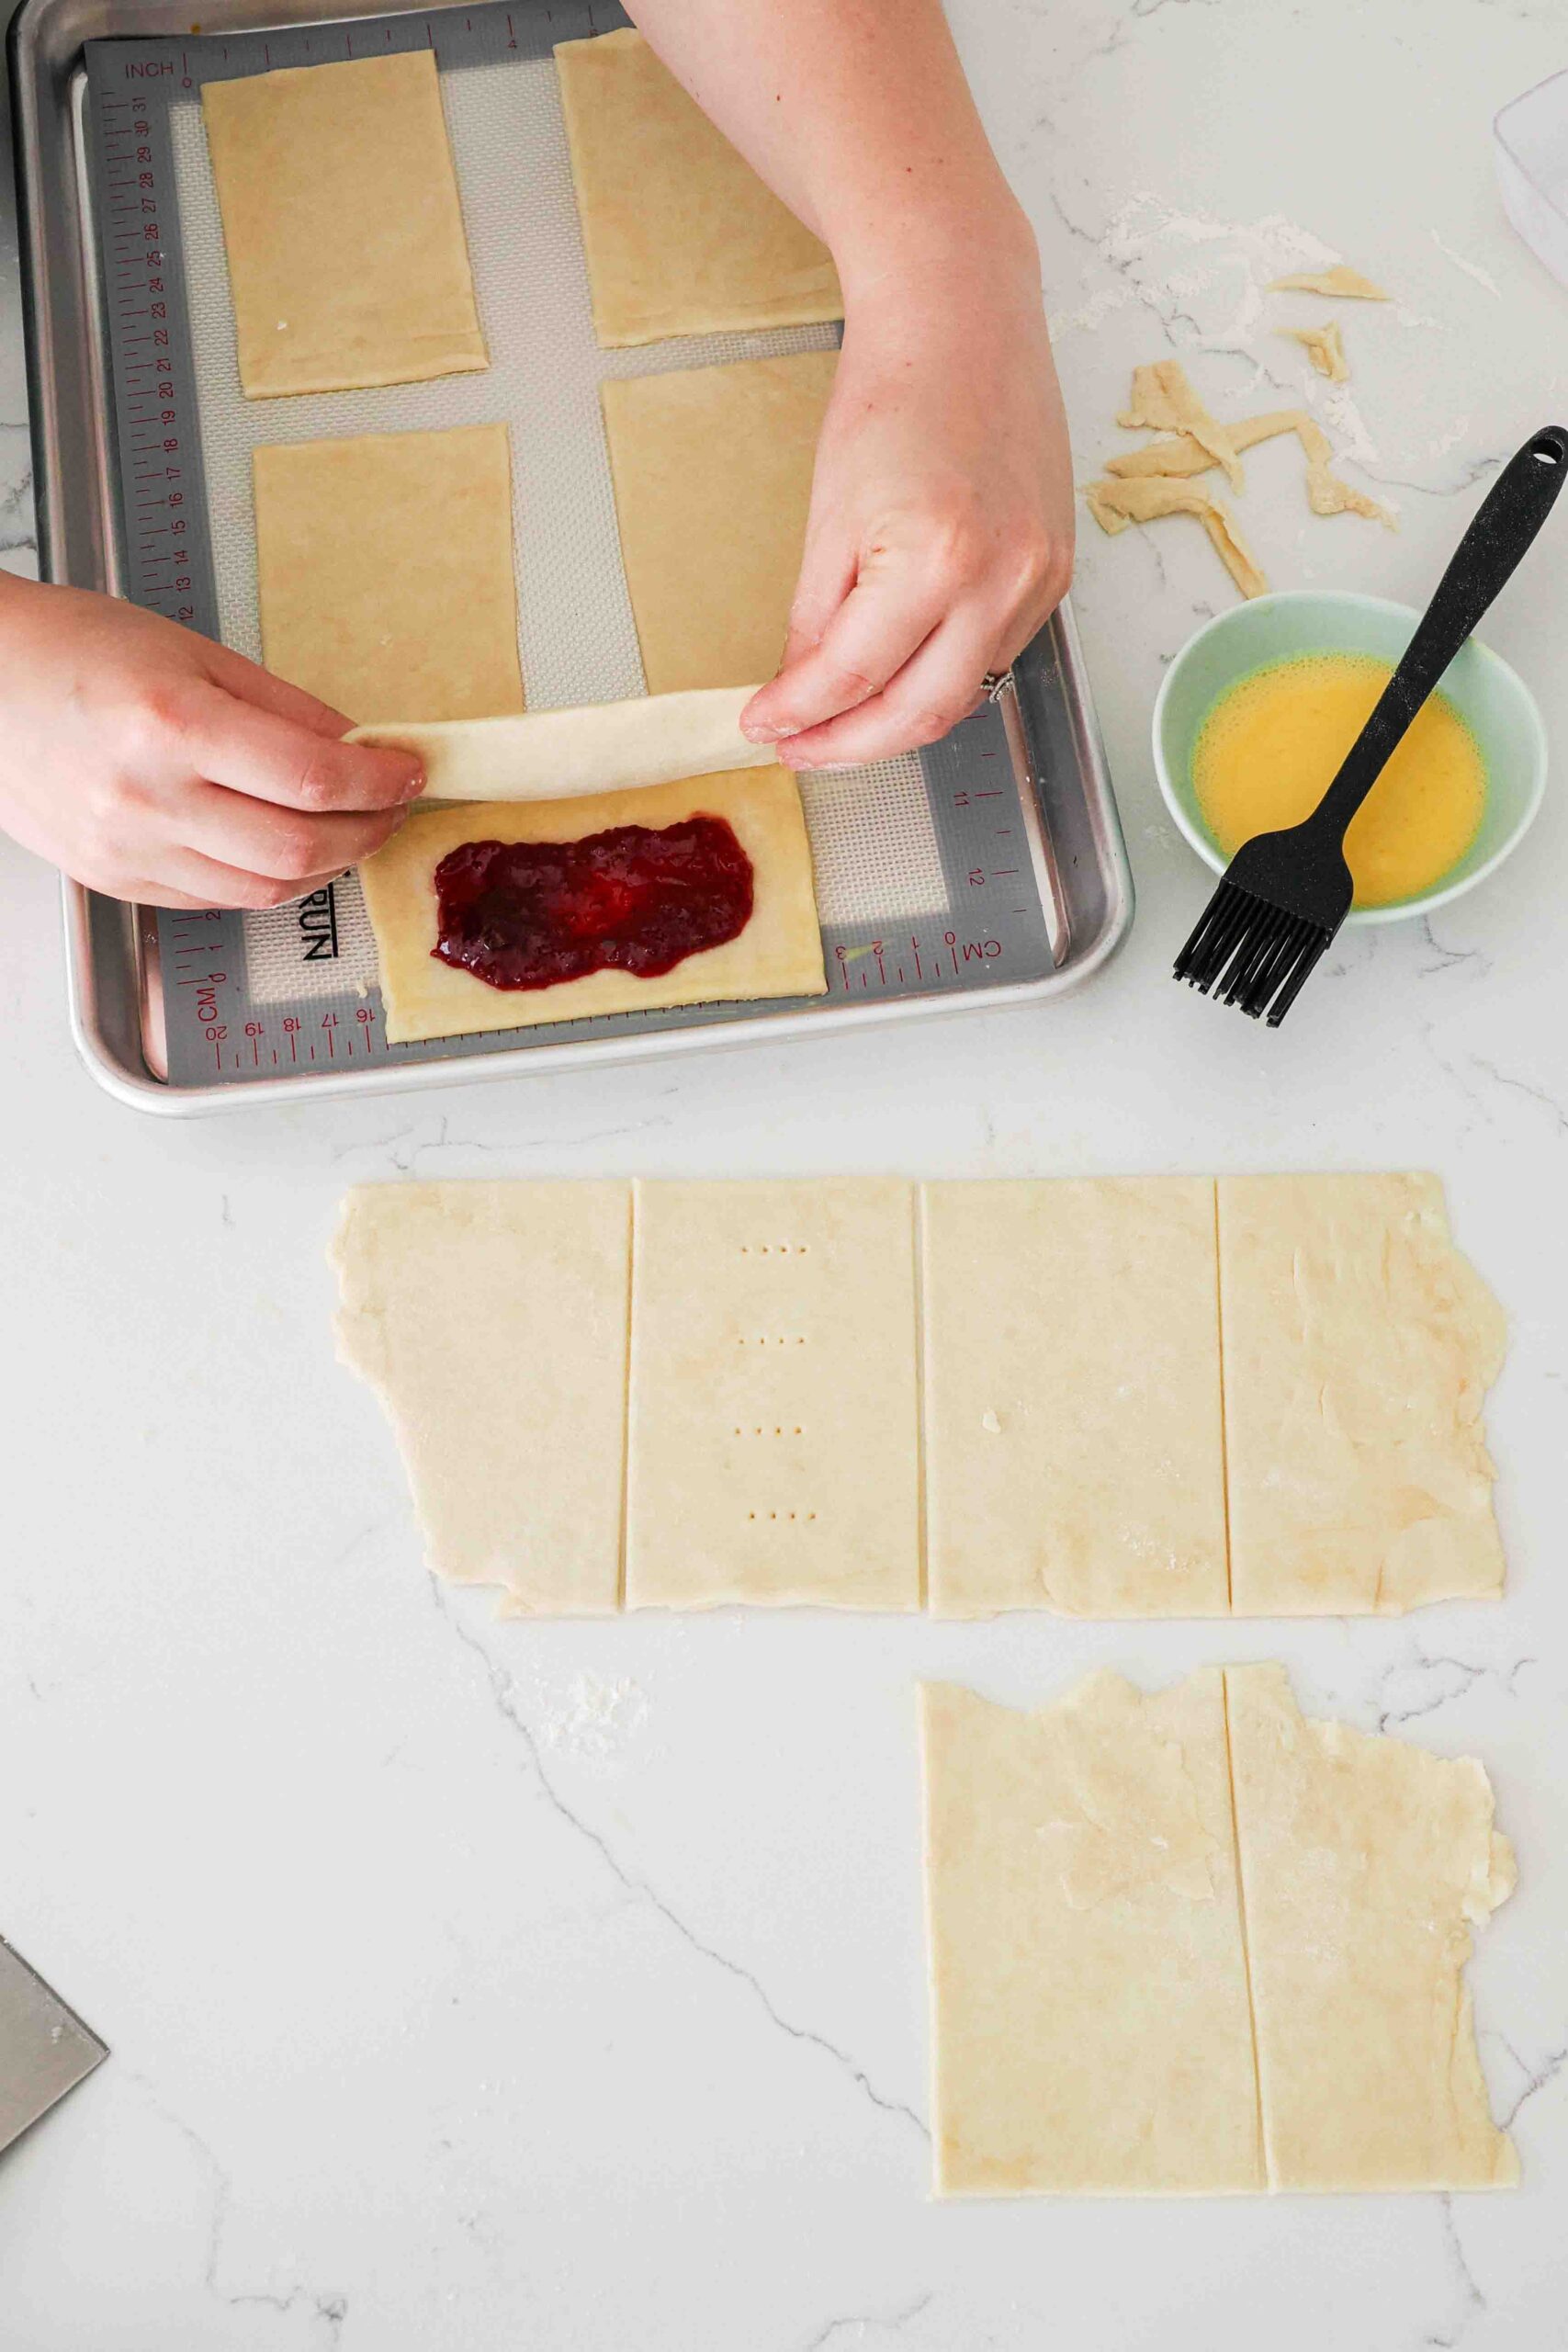 Two hands gently place a rectangle of pie dough over another topped with jam.